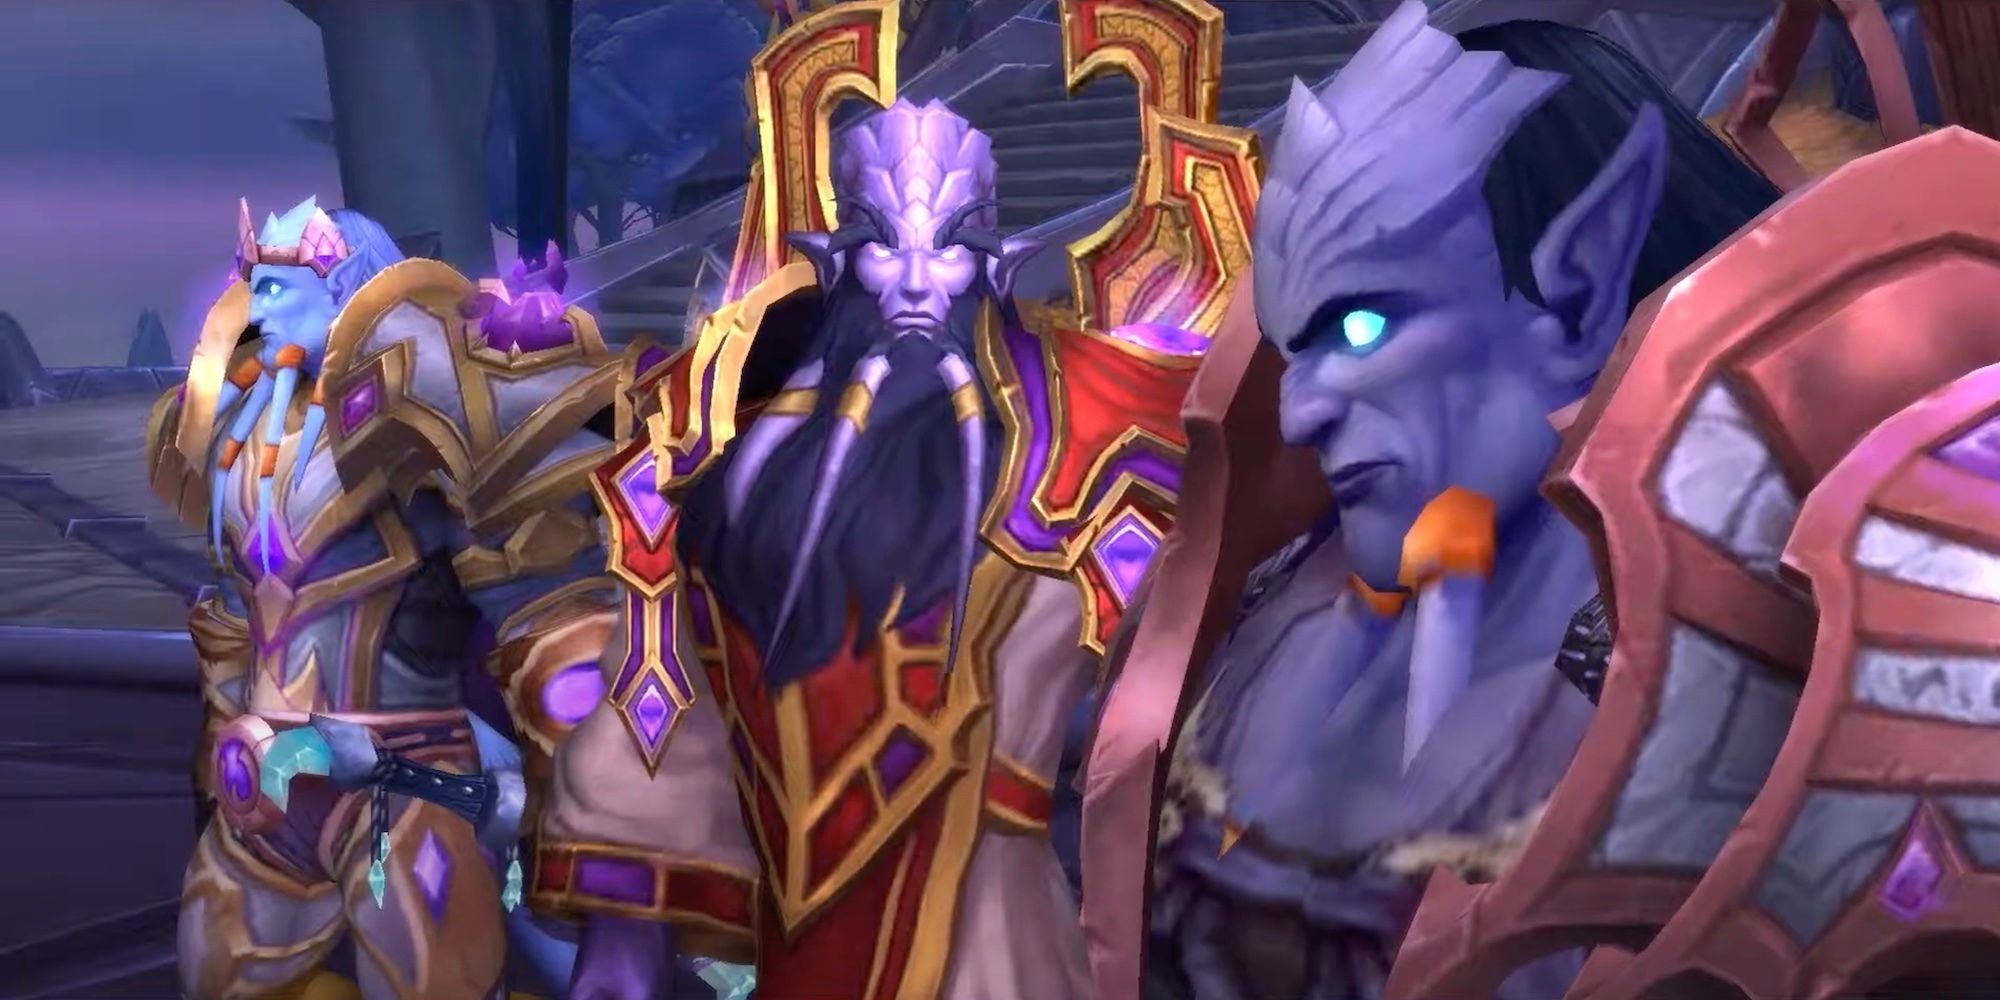 World of Warcraft Removes & Changes More Inappropriate Content